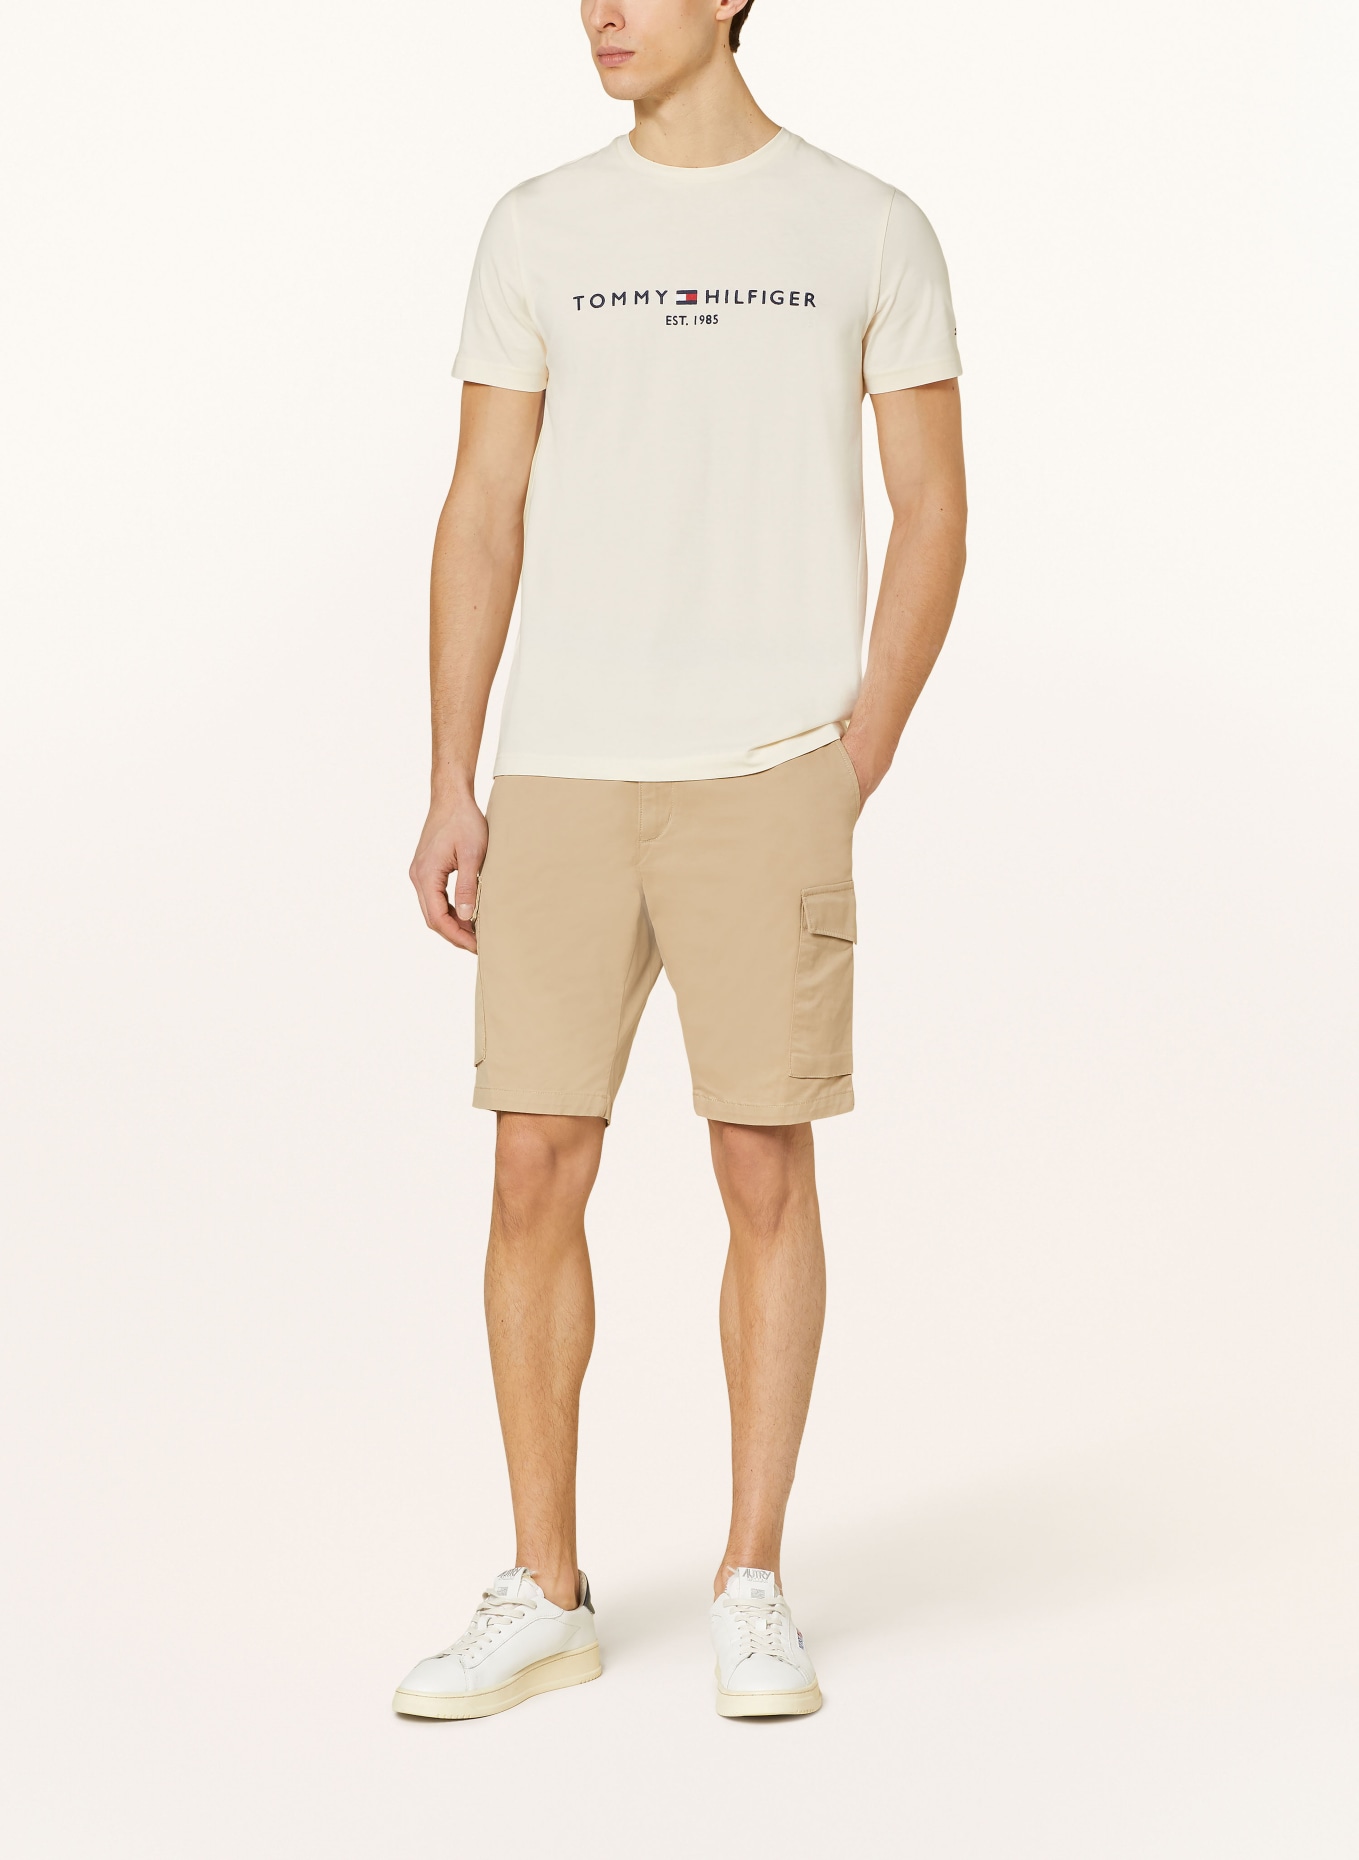 TOMMY HILFIGER T-shirt, Color: LIGHT YELLOW (Image 2)